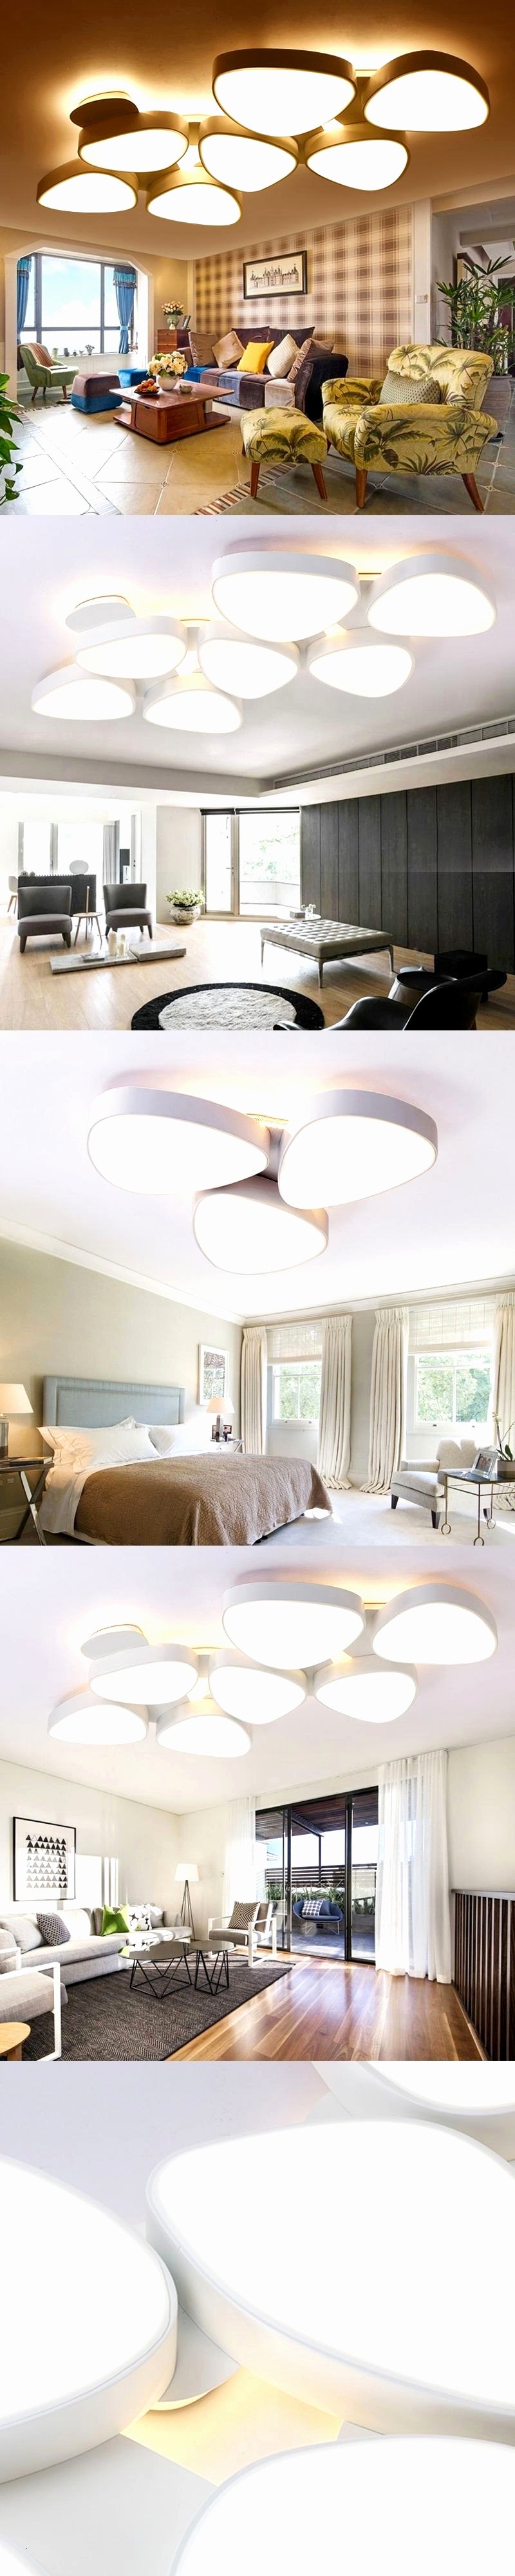 Home fice Ceiling Light Inspirational Led Lighting for Fices New Dominion Lighting 0d